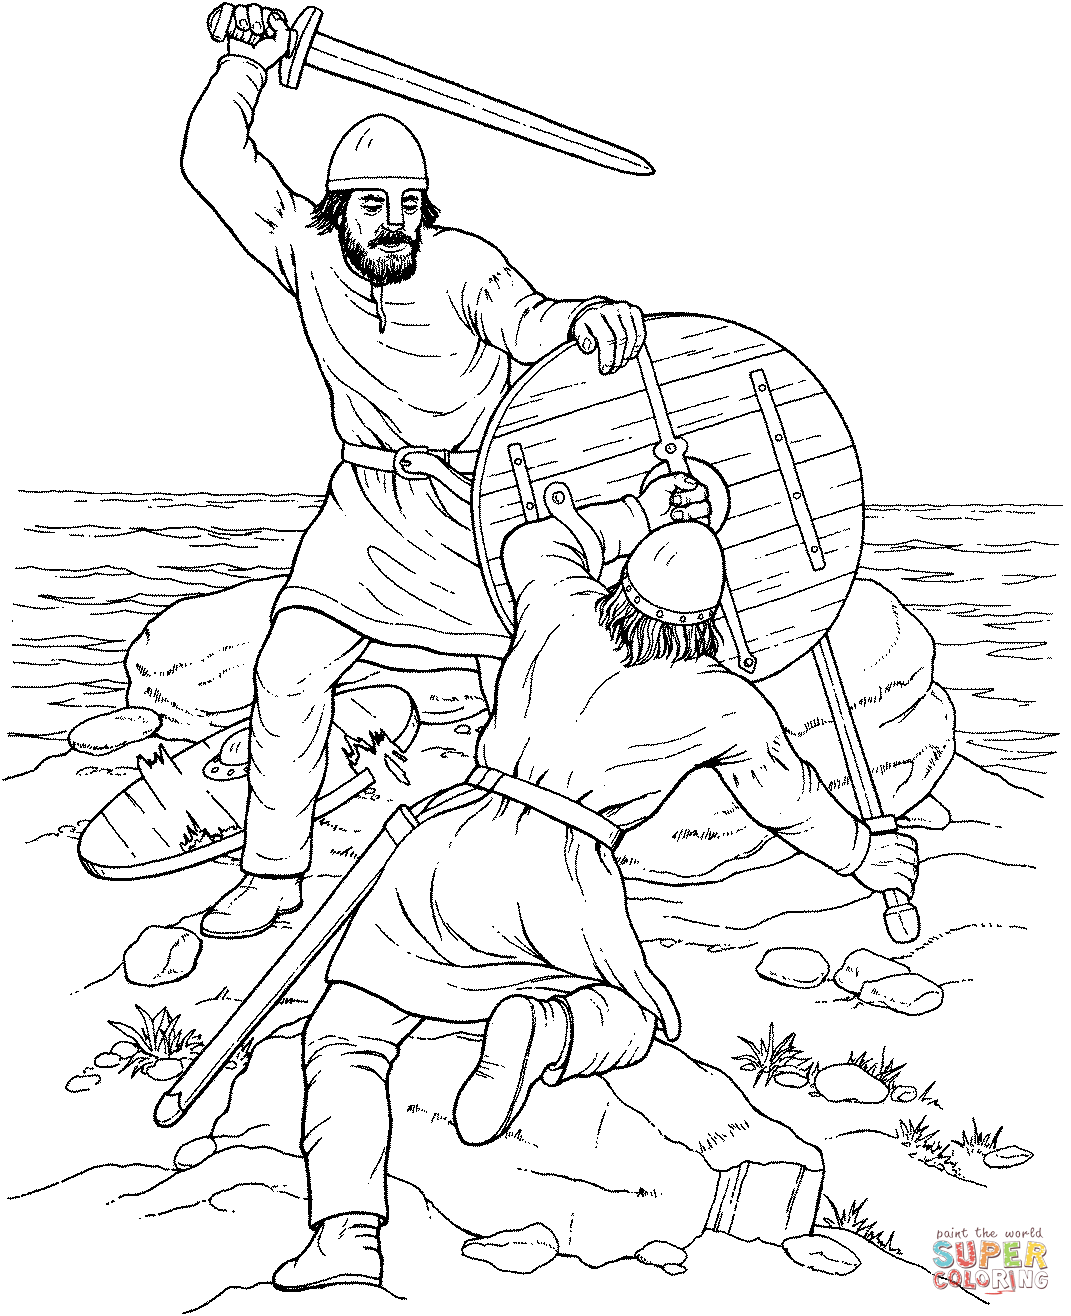 Fight Of Vikings coloring page | Free Printable Coloring Pages in 2020 | Coloring  pages, Free coloring pages, Viking history